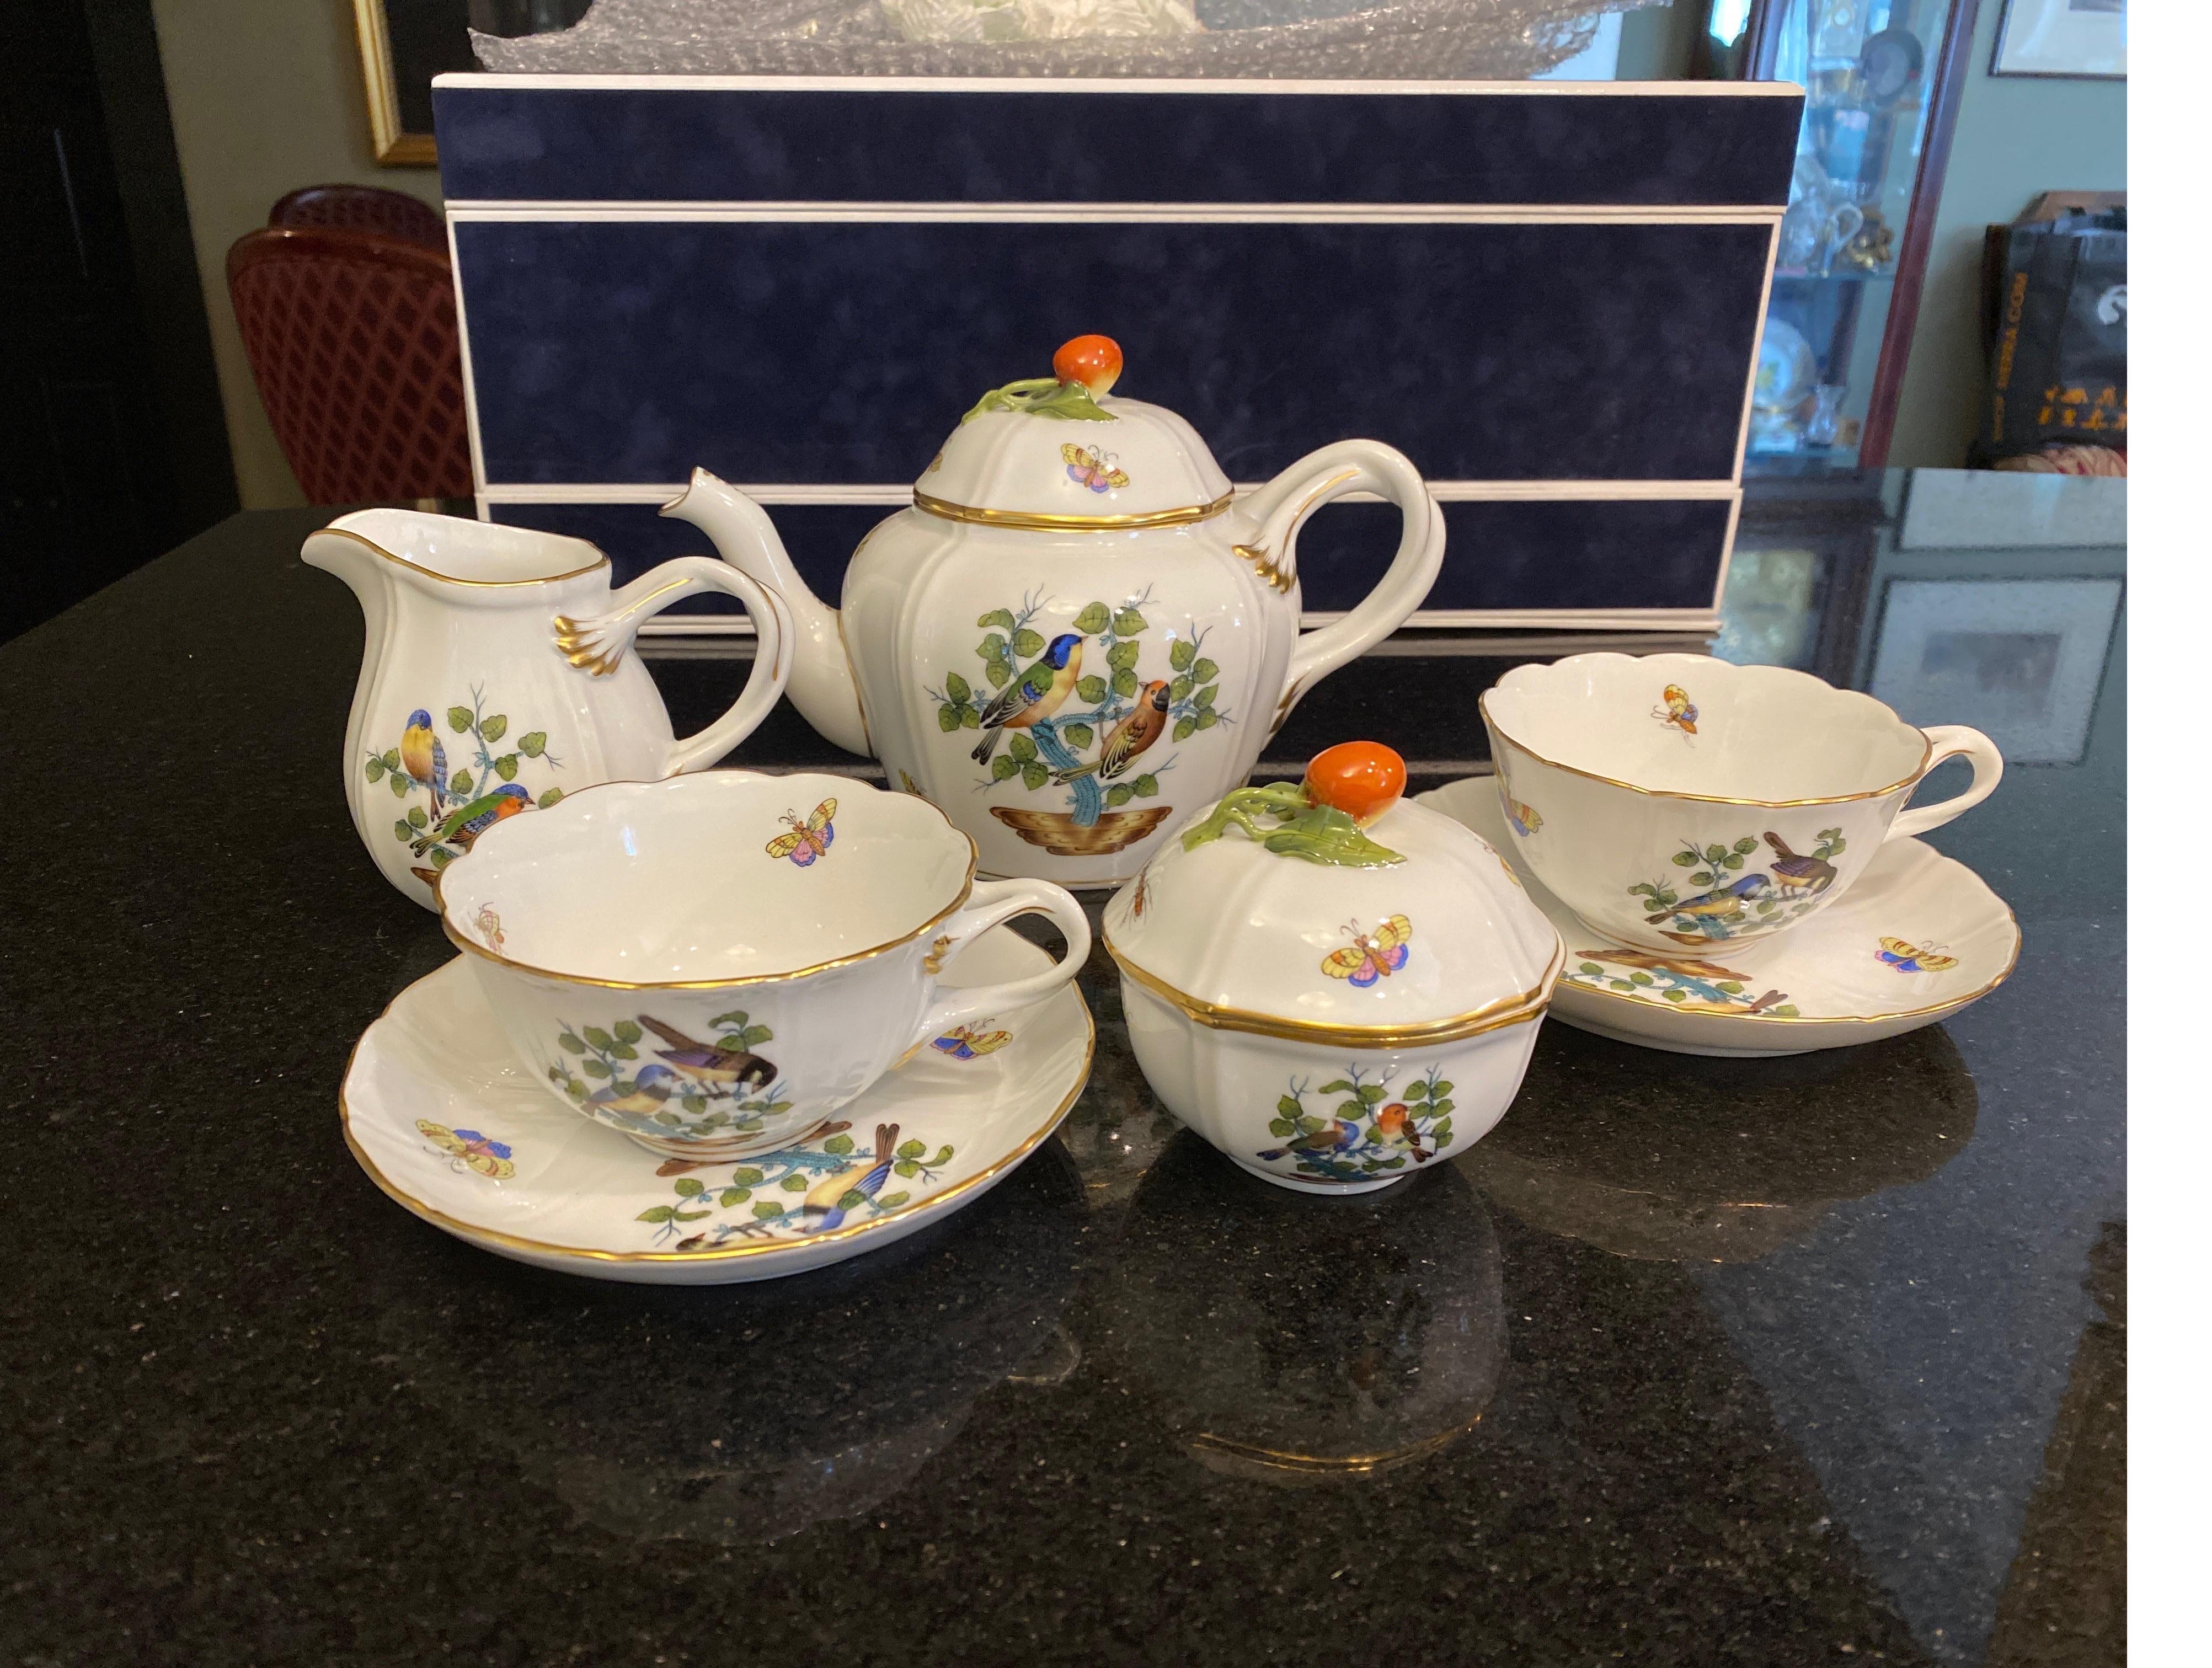 Hand painted Herend tea set in the Rothschild bird pattern. The teapot, sugar, creamer, two tea cups and two saucers with hand painted birds, butterflies and insects. The cost is for the entire set. Teapot is 6 high 8.75 wide, sugar is 3.75 high,